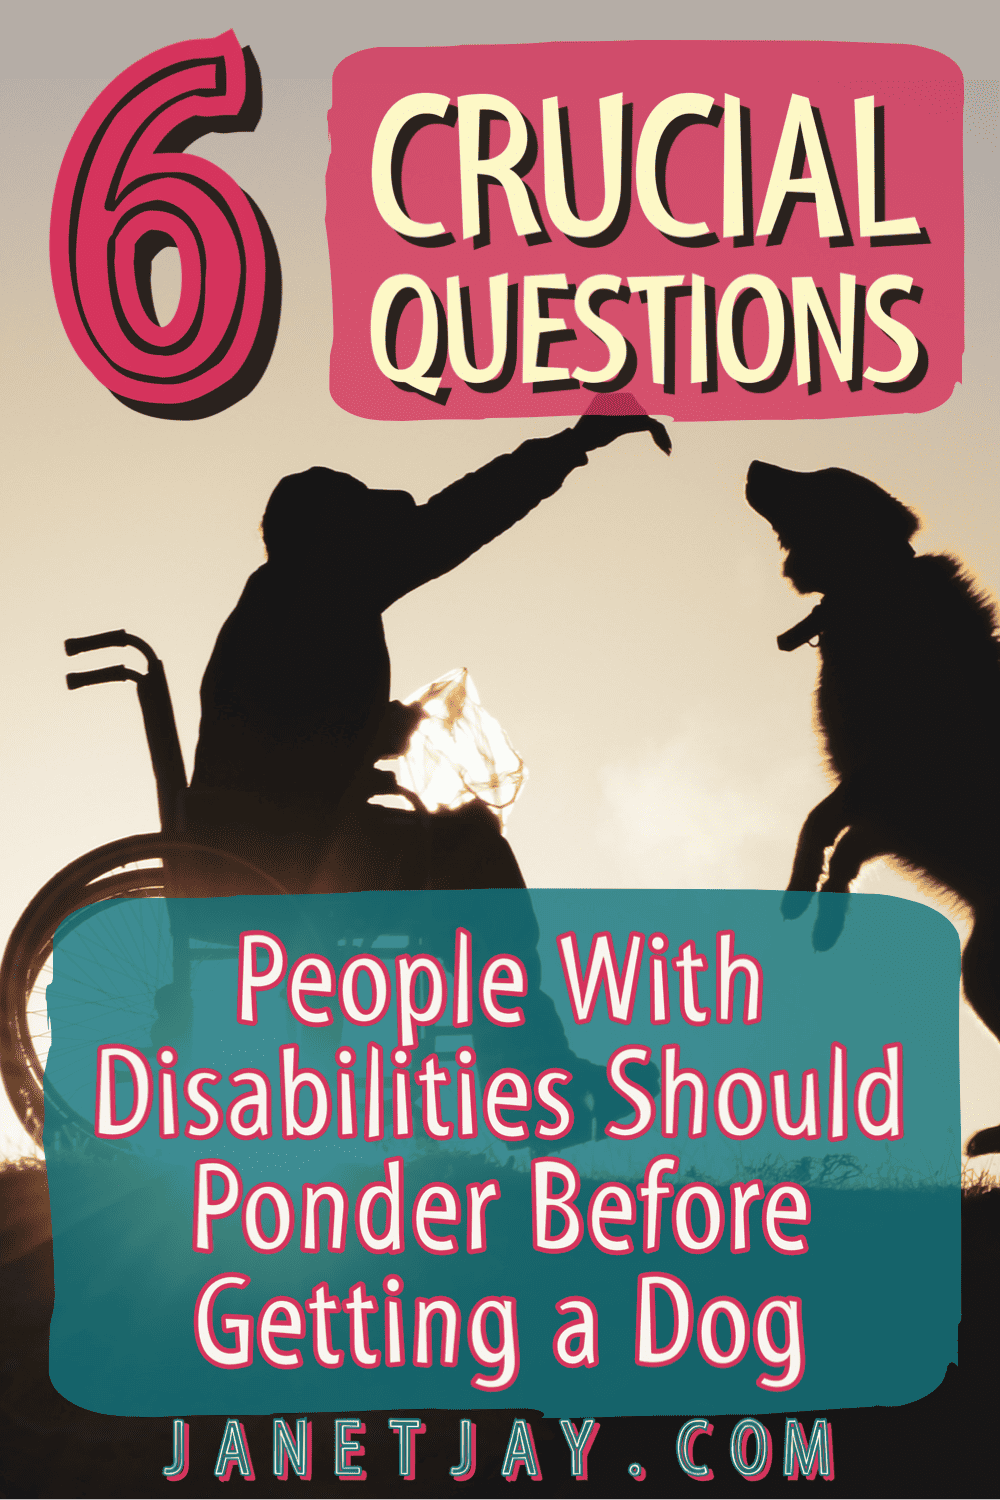 6 crucial questions people with disabilities should ponder before getting a dog, janetjay.com" on a background of a silhouetted person in a wheelchair giving a treat to a jumping dog